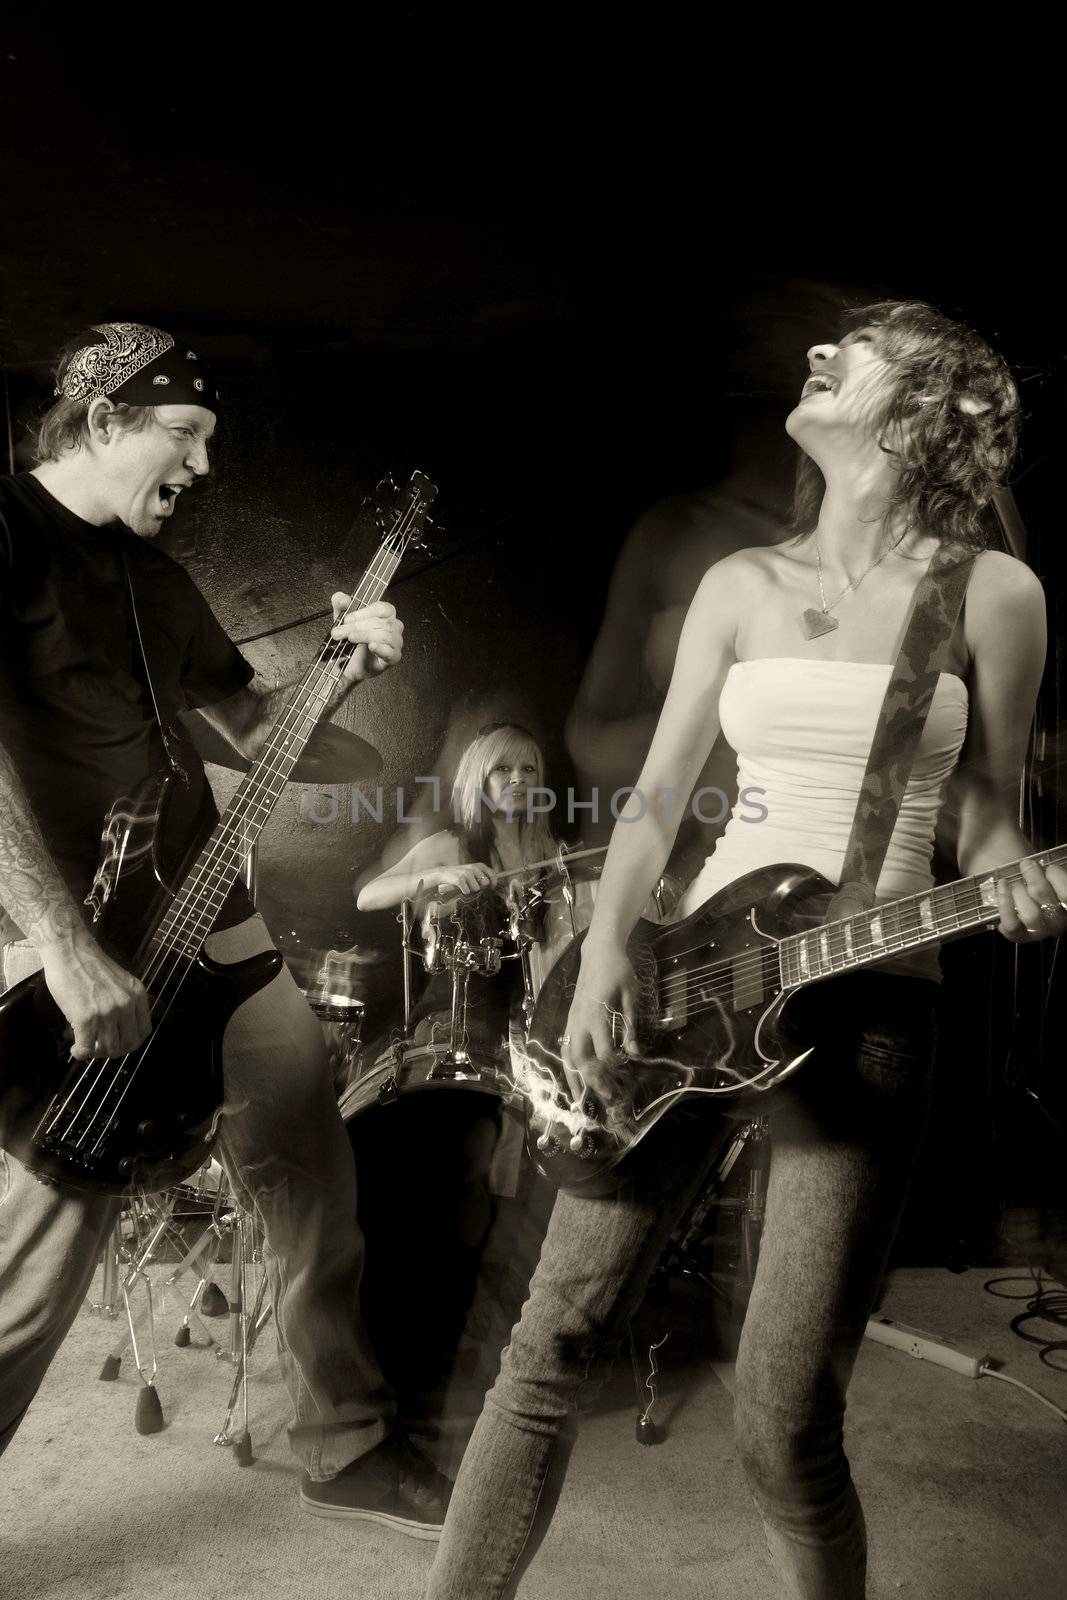 Band playing on a stage. Male bassist with female guitarist and drummer. Shot with strobes and slow shutter speed to create lighting atmosphere and blur effects. Slight motion blur on performers.